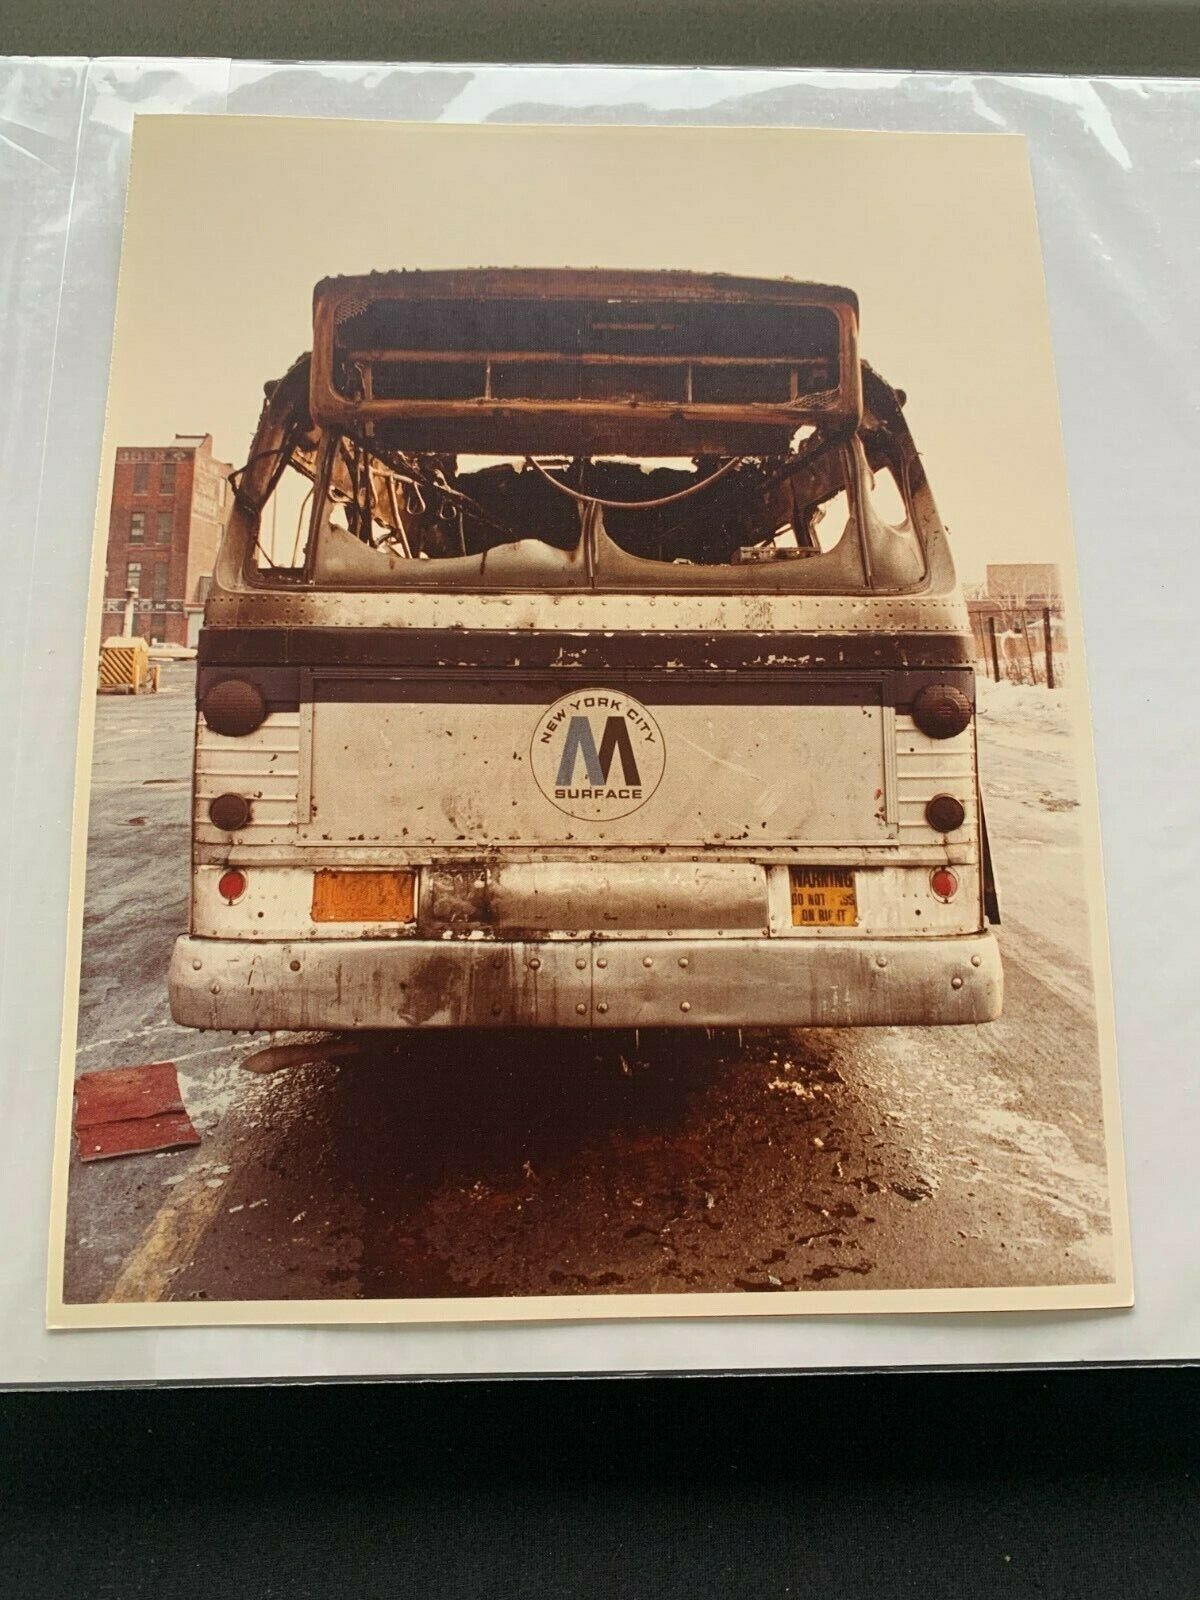 8X10 NY NYC SURFACE TRANSIT BUS FIRE RAVAGED DAMAGE REPORT WINTER PHOTOGRAPH